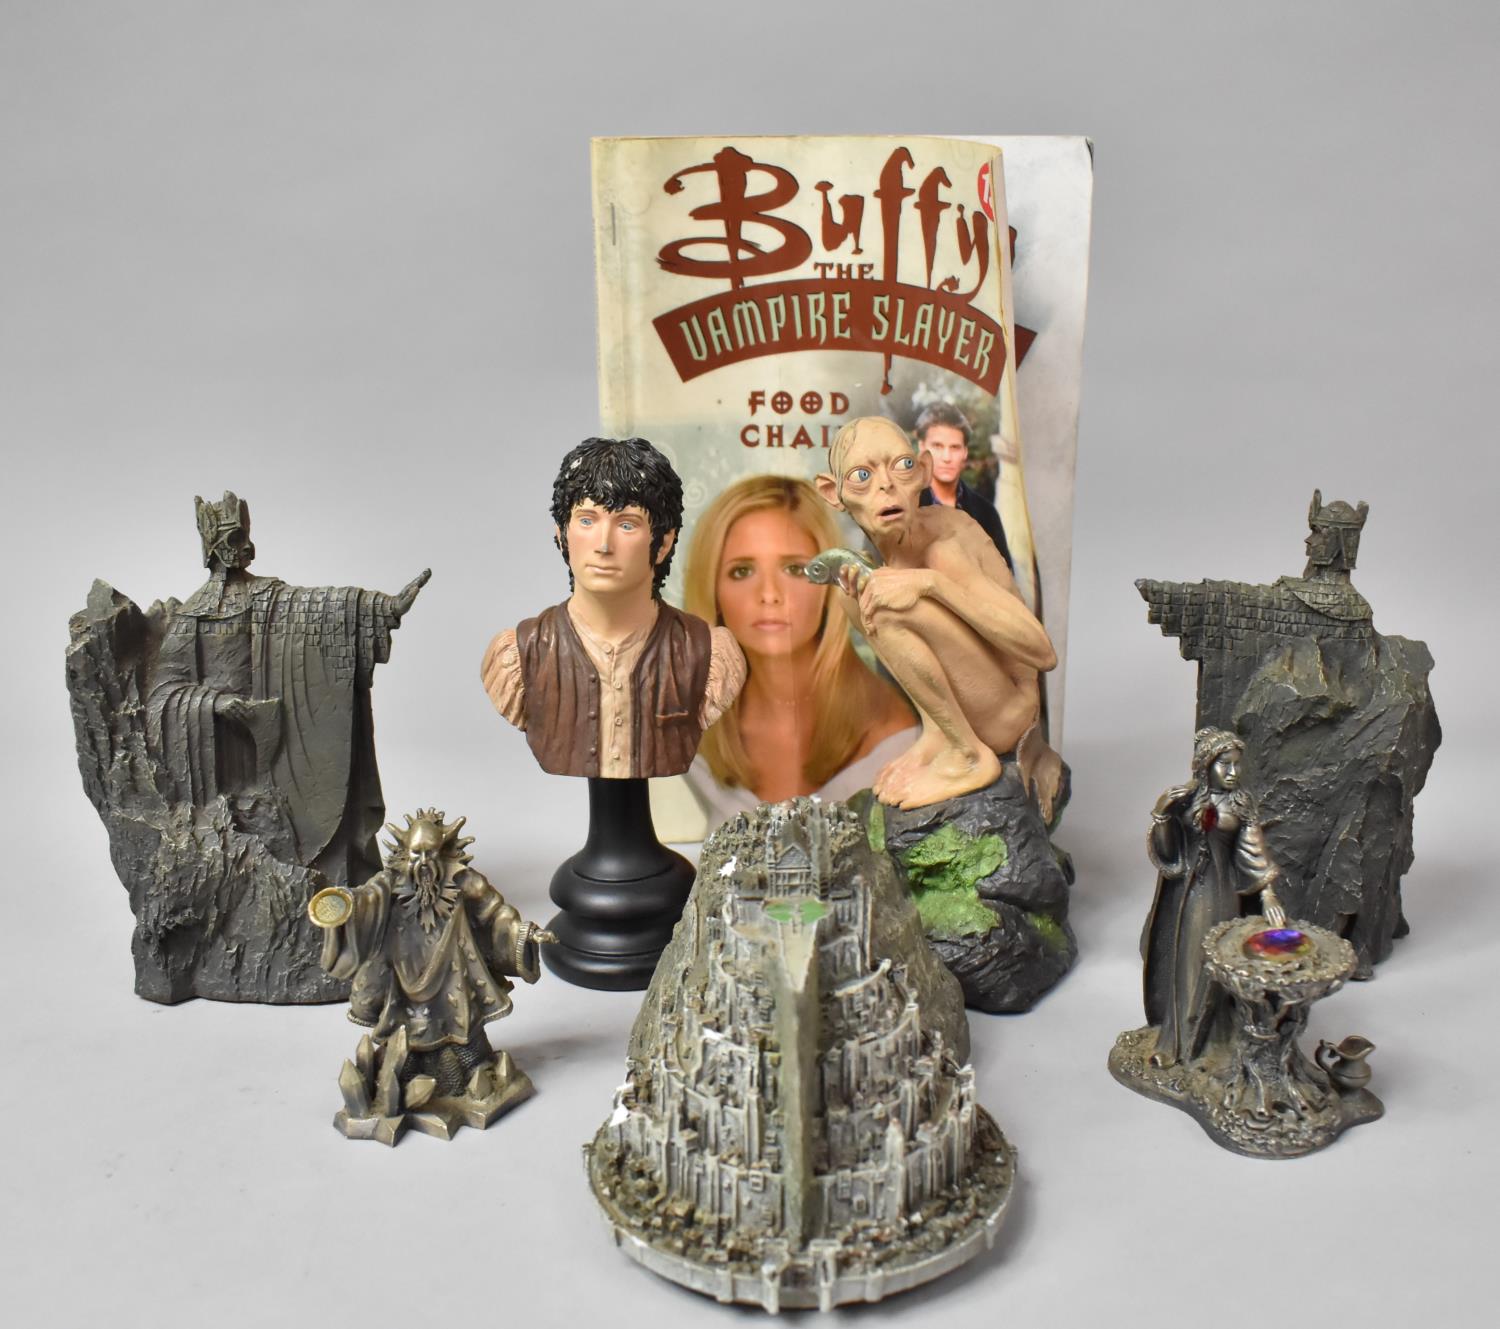 A Collection of Lord of the Rings Figures, Pewter Figures and a Buffy the Vampire Slayer Comic (